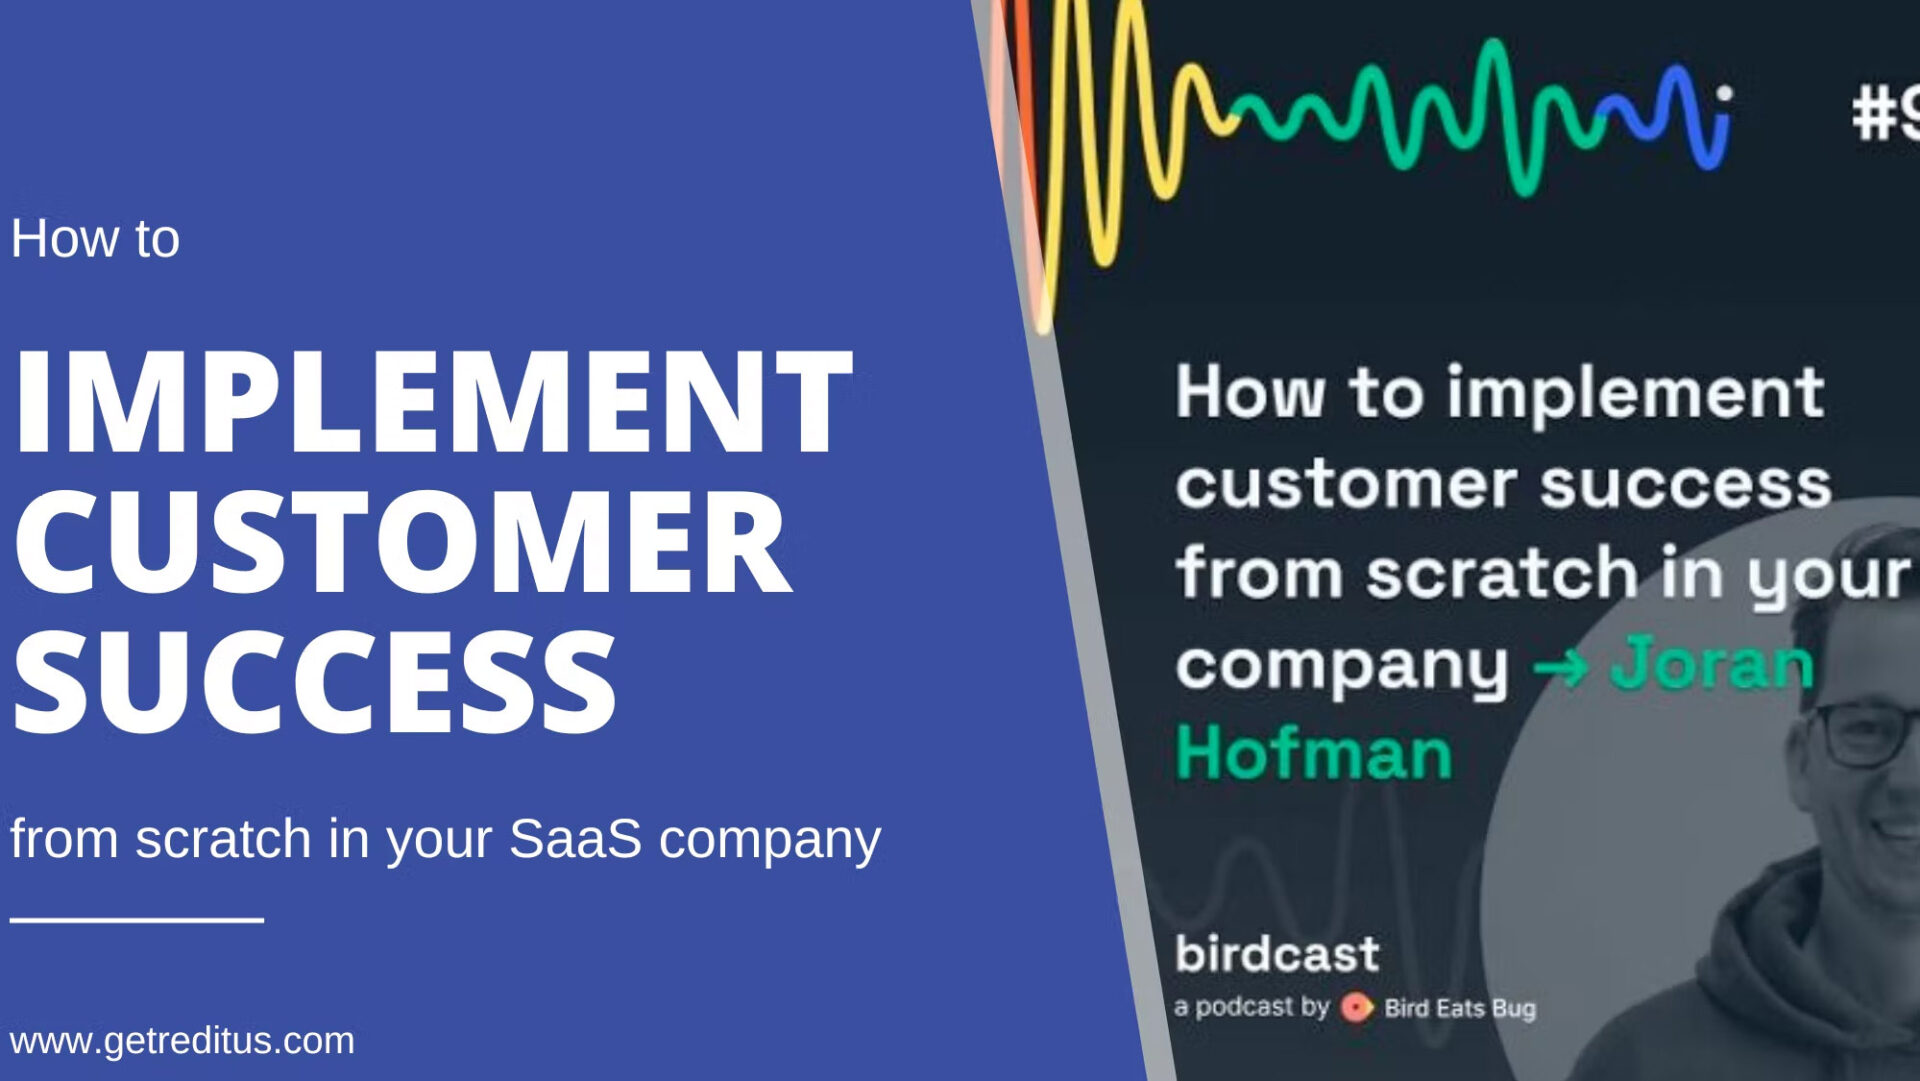 How to implement customer success from scratch in your SaaS?